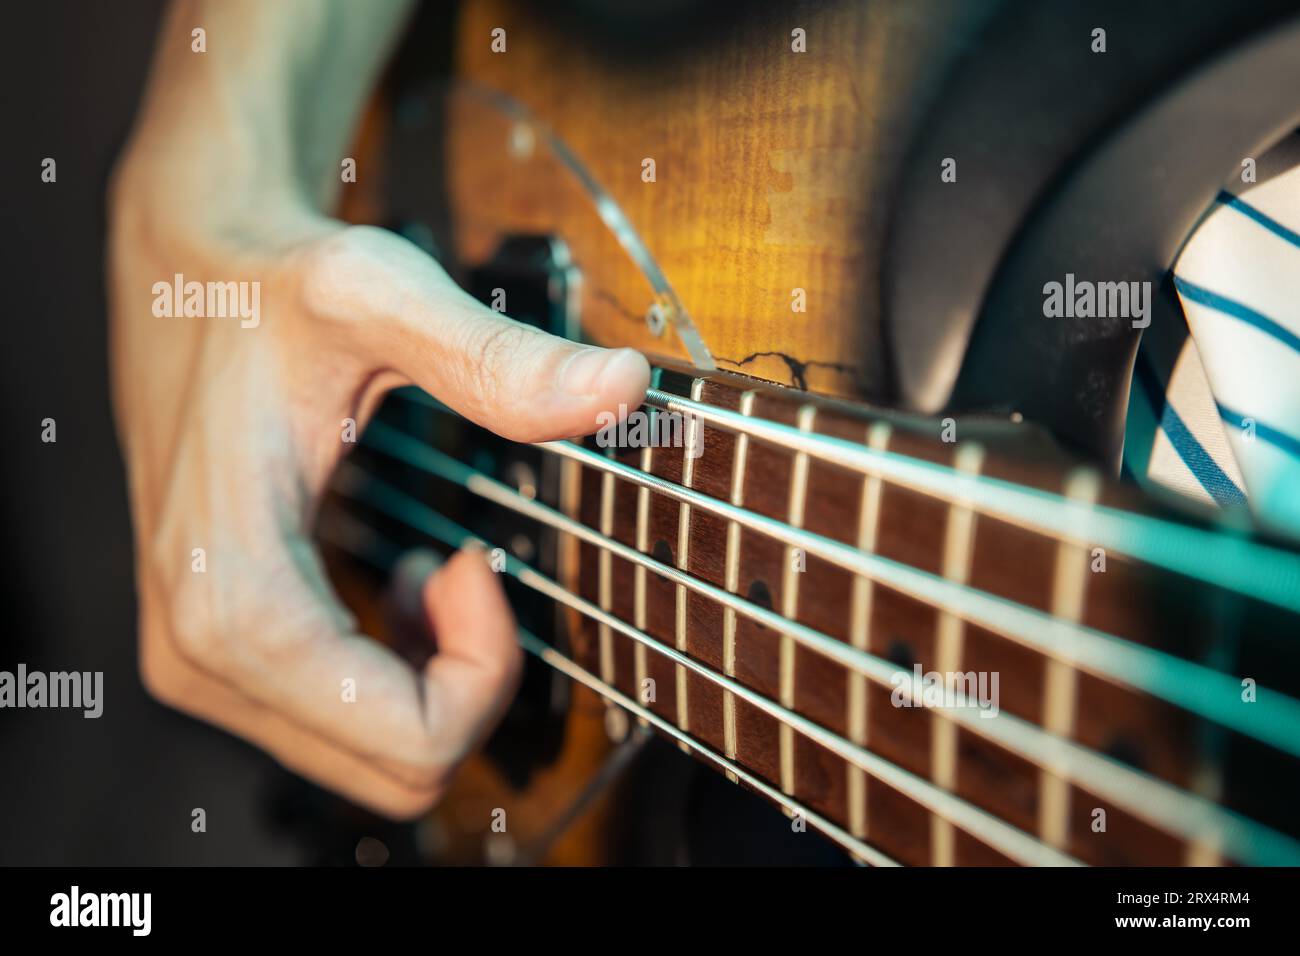 Bassist slapping electric bass guitar Stock Photo